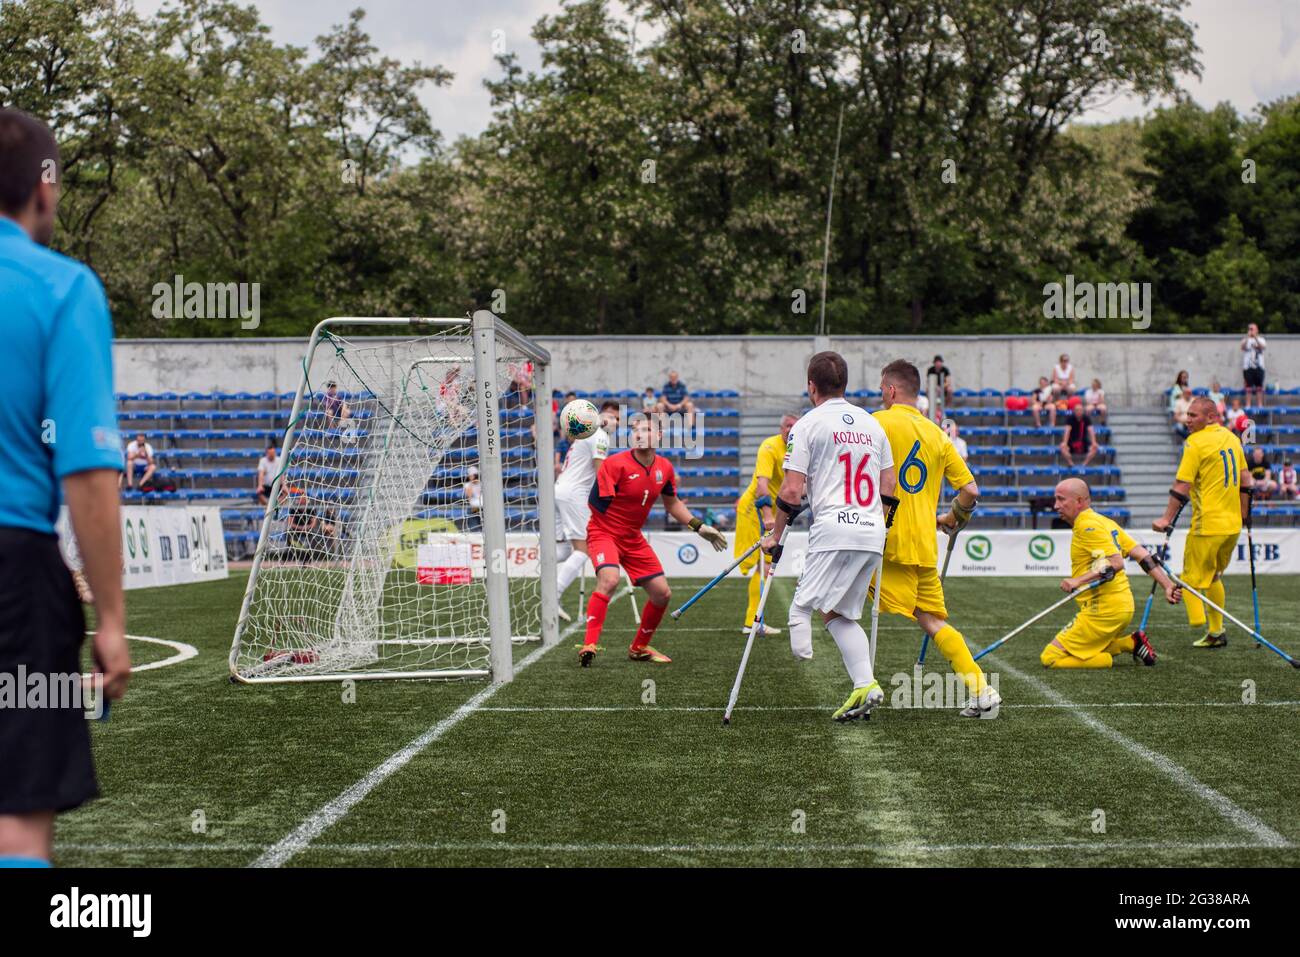 Polish player Jakub Kozuch is seen in action during the Amp Futbol Cup 2021 between Poland and Ukraine in Warsaw June 12-13th. (Final scores, Poland 7:0 Ukraine) Stock Photo